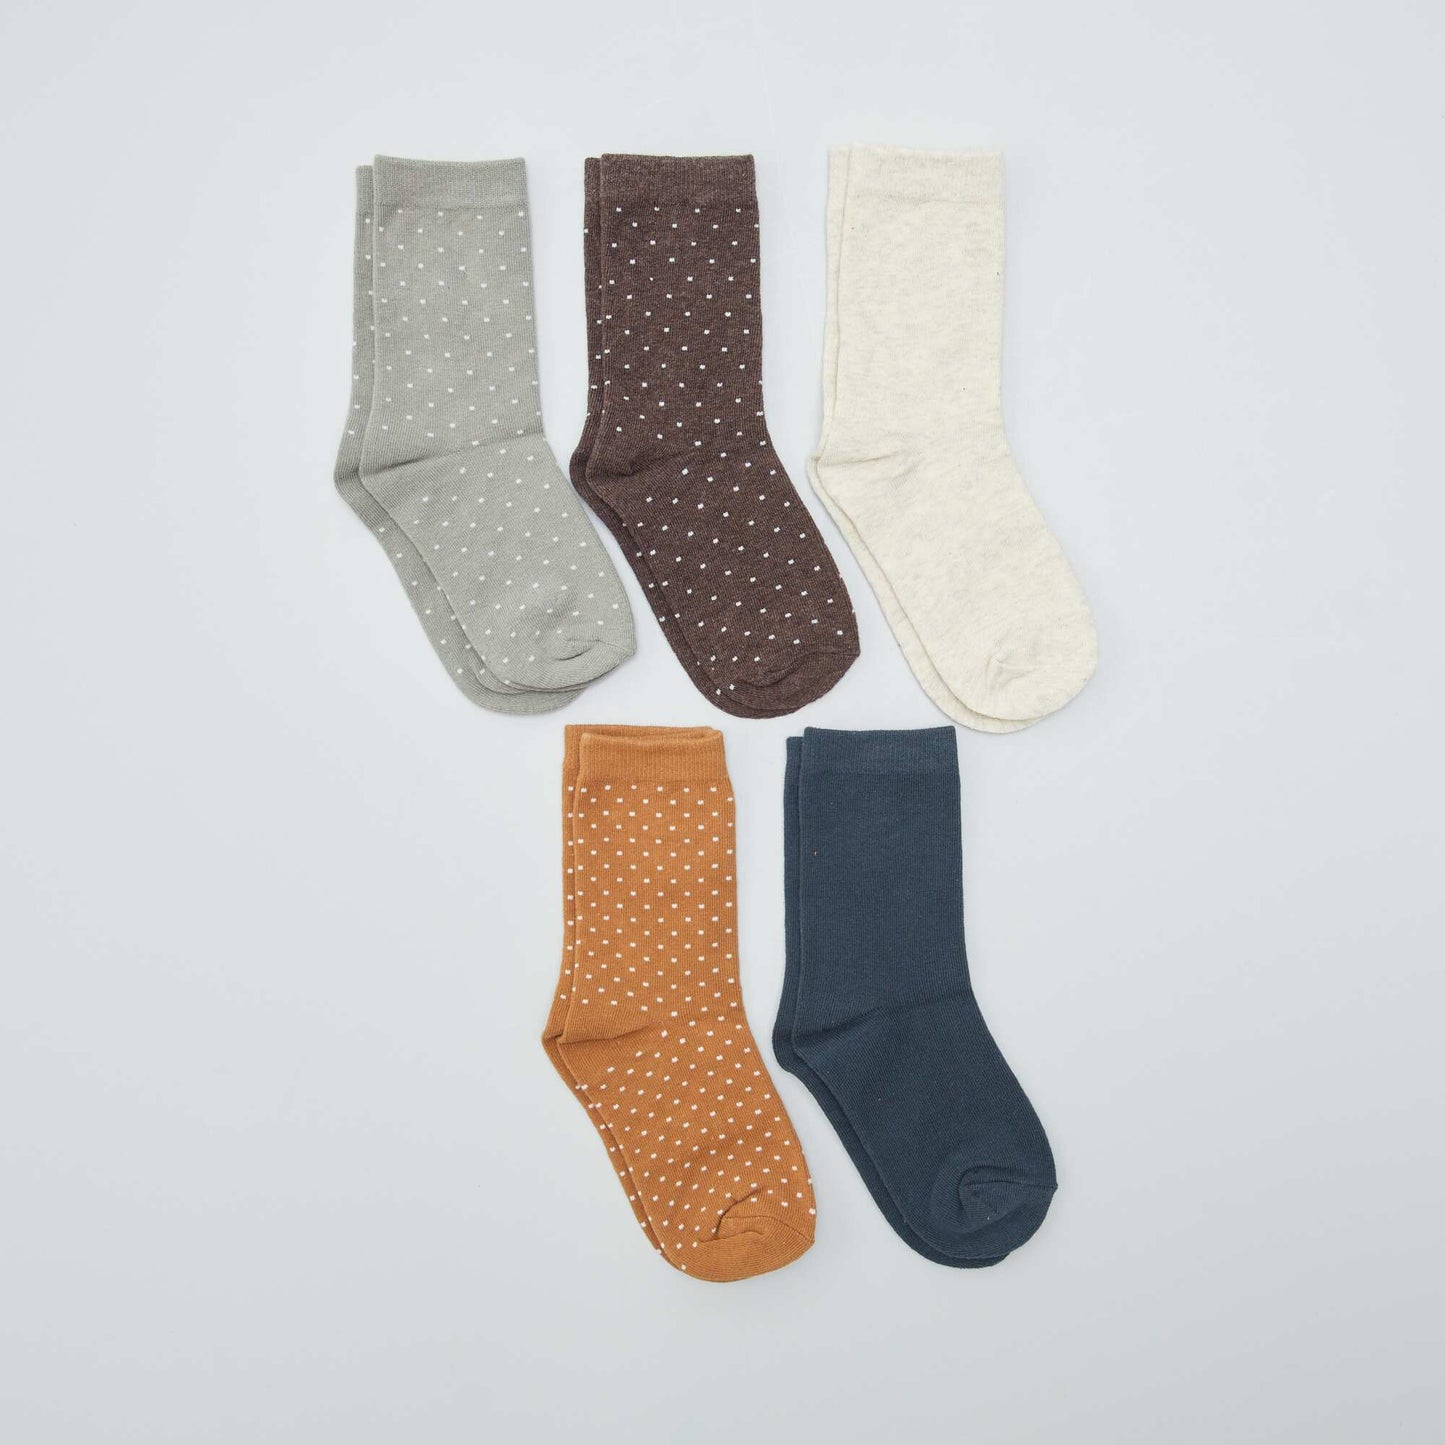 Pack of 5 pairs of socks CAMEL